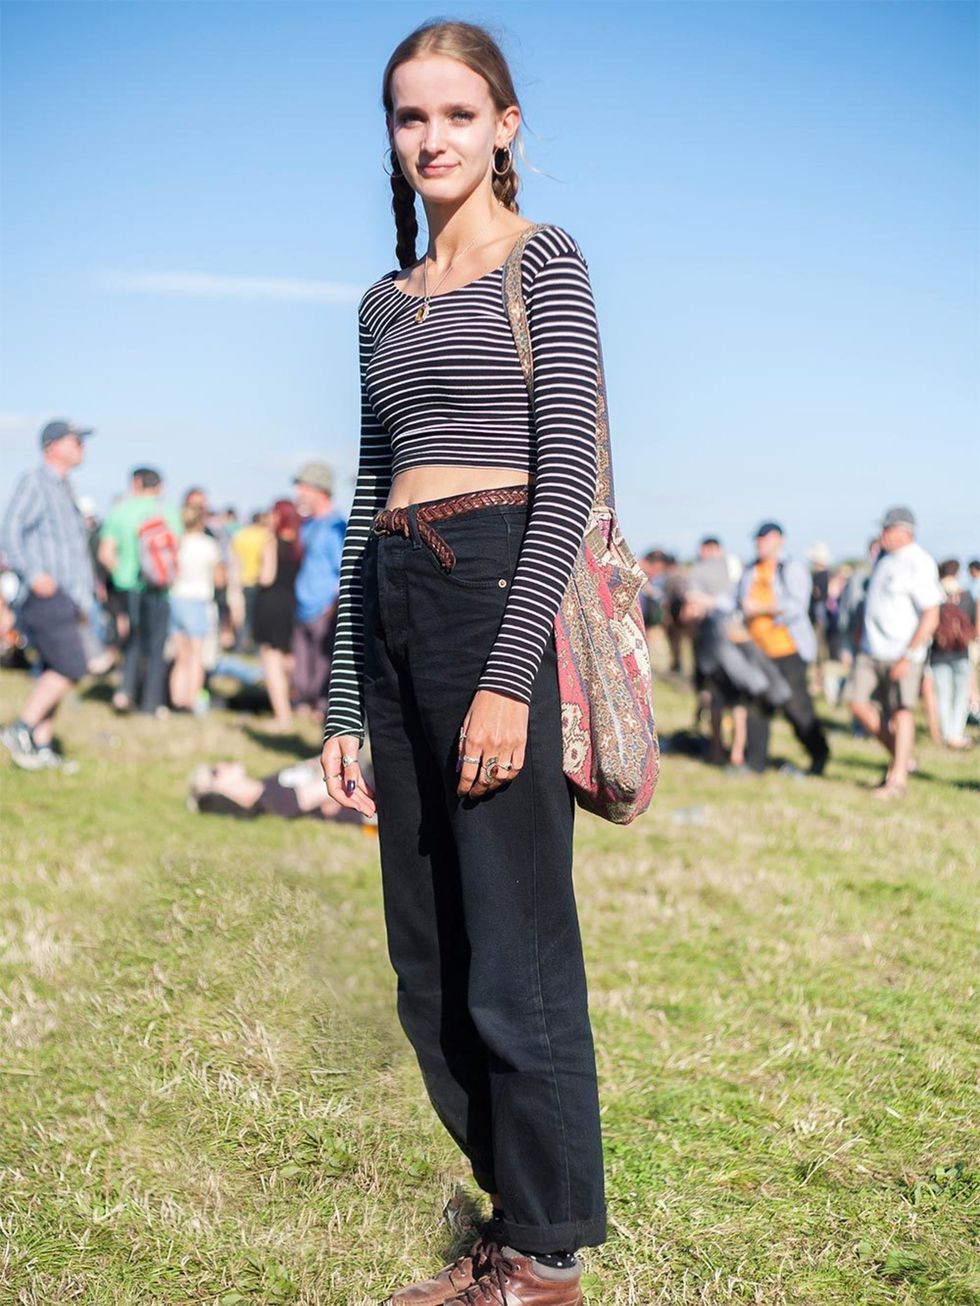 37 Of the Best Festival Street Style Looks Ever